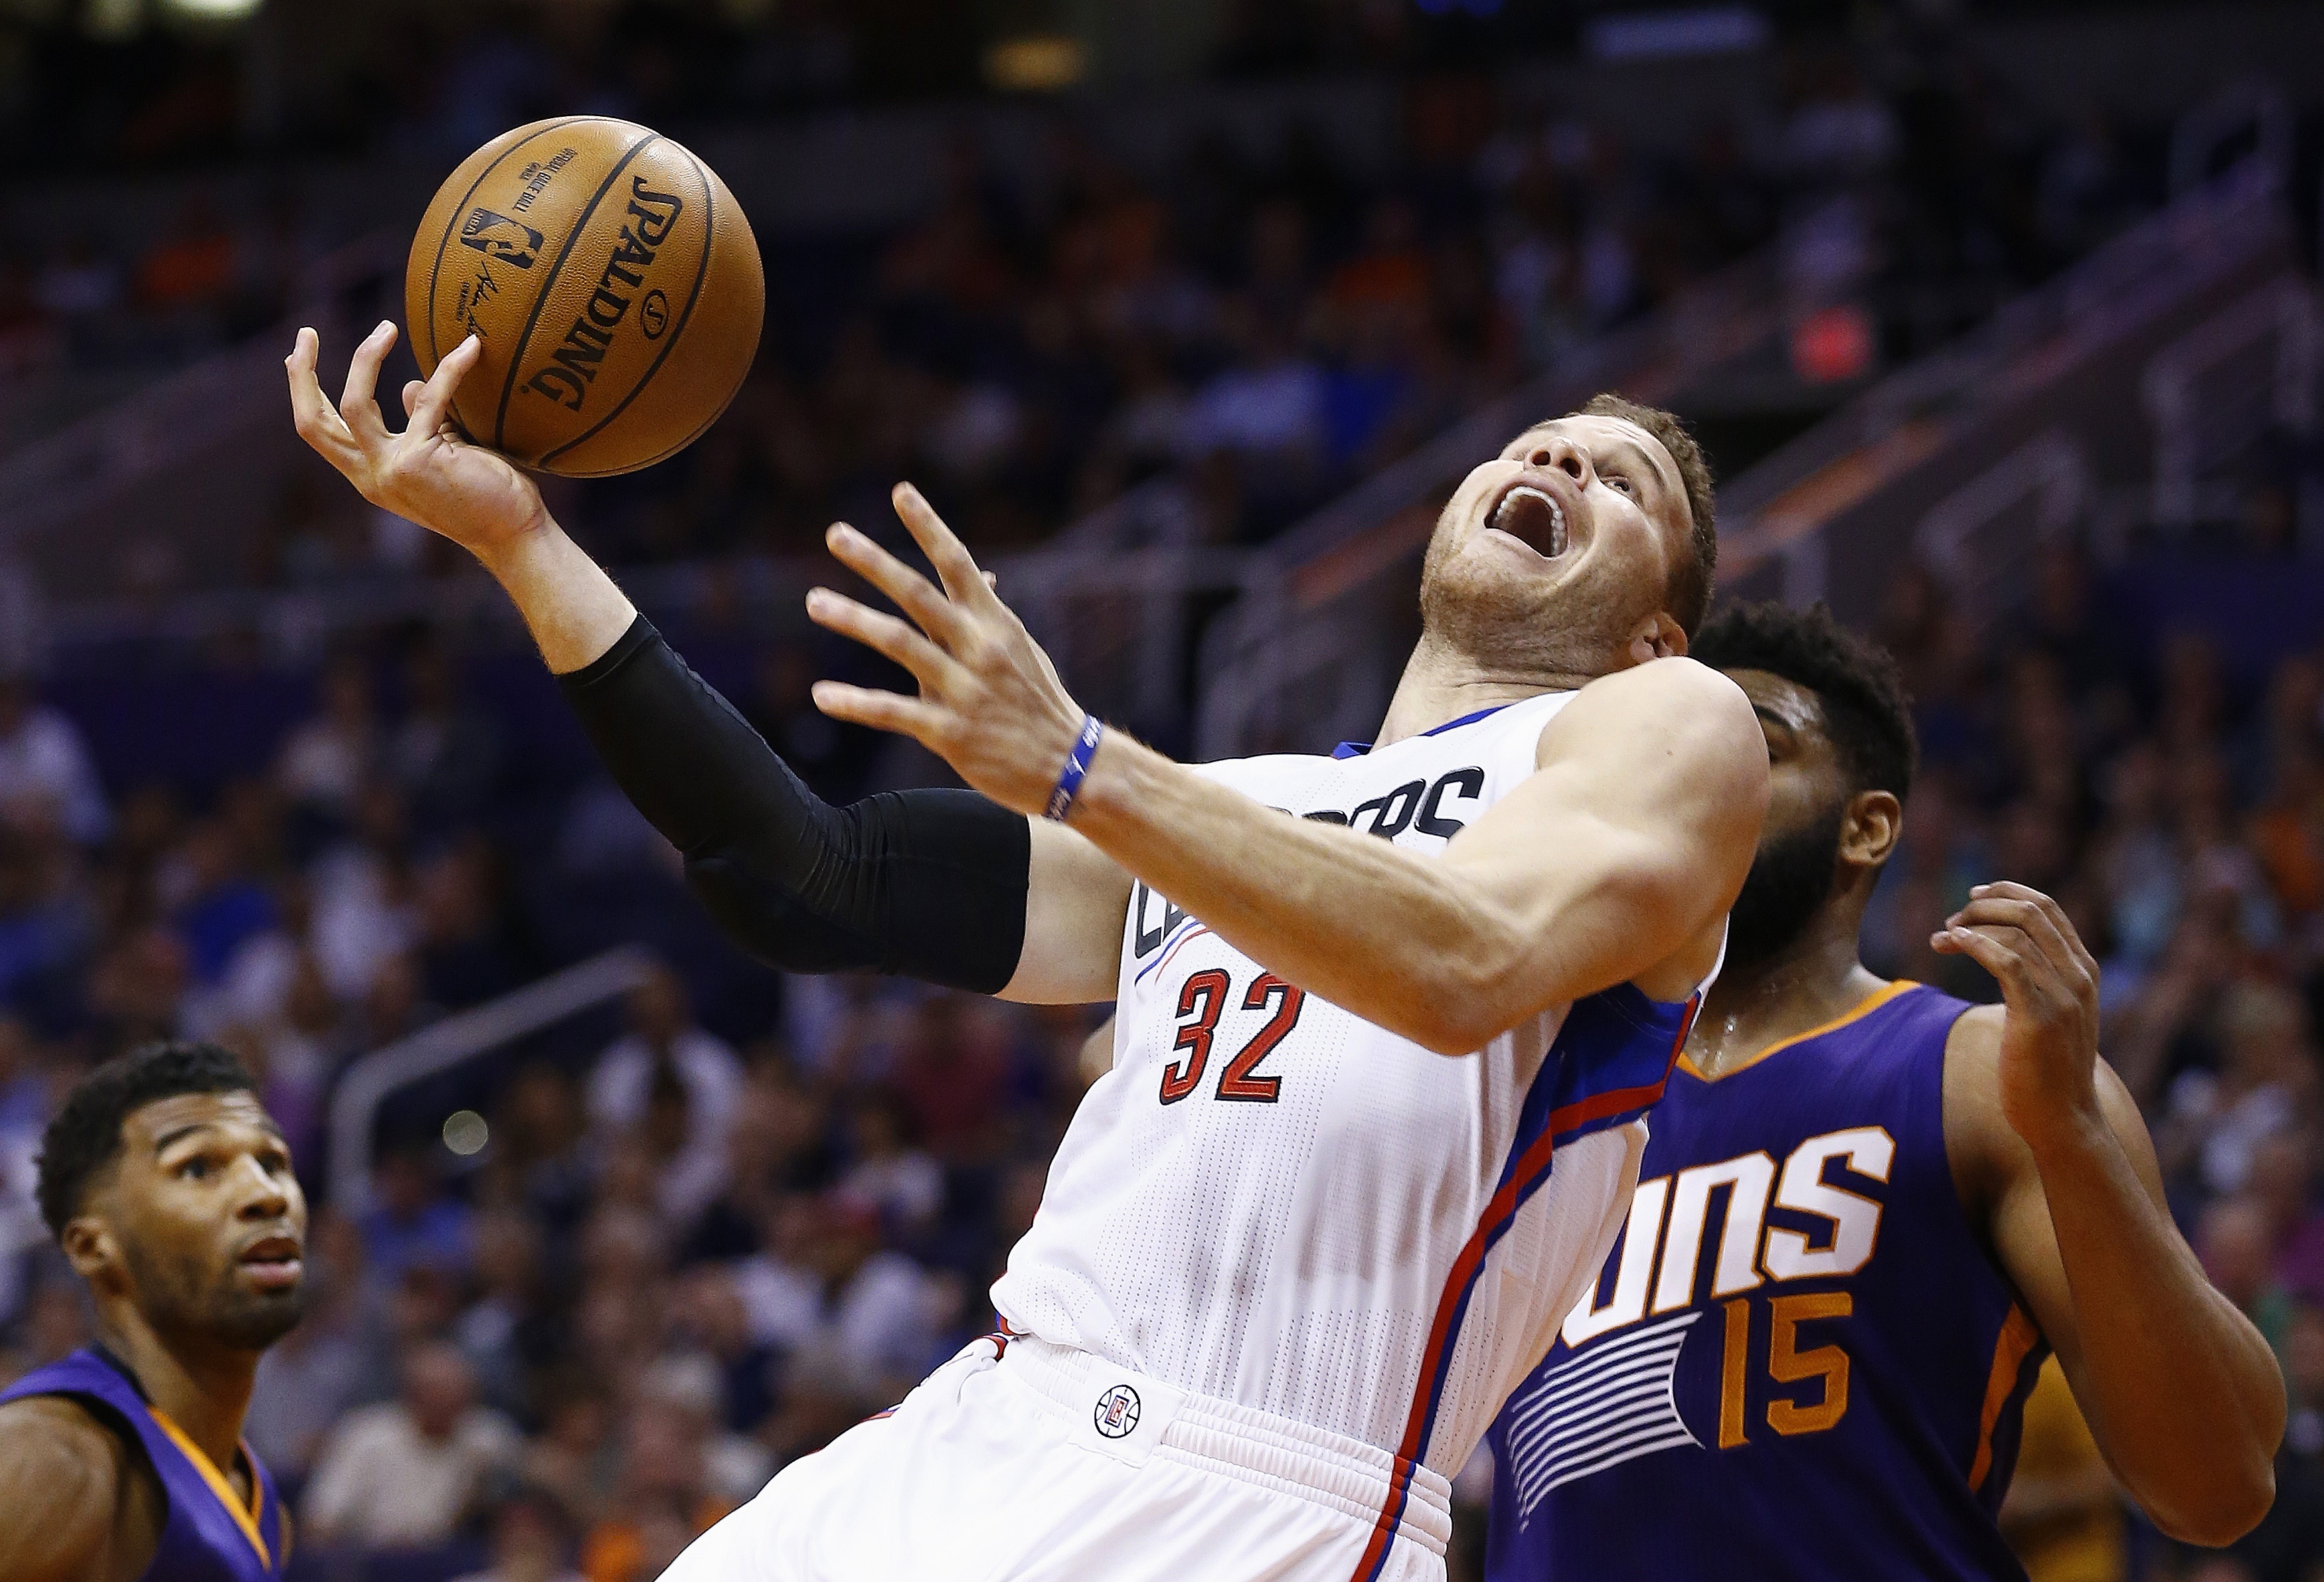 Los Angeles Clippers' Blake Griffin (32) tries to shoot over Phoenix Suns' Alan Williams (15) as Suns' Ronnie Price, left, looks on during the first half of an NBA basketball game Thursday, March 30, 2017, in Phoenix. (AP Photo/Ross D. Franklin)